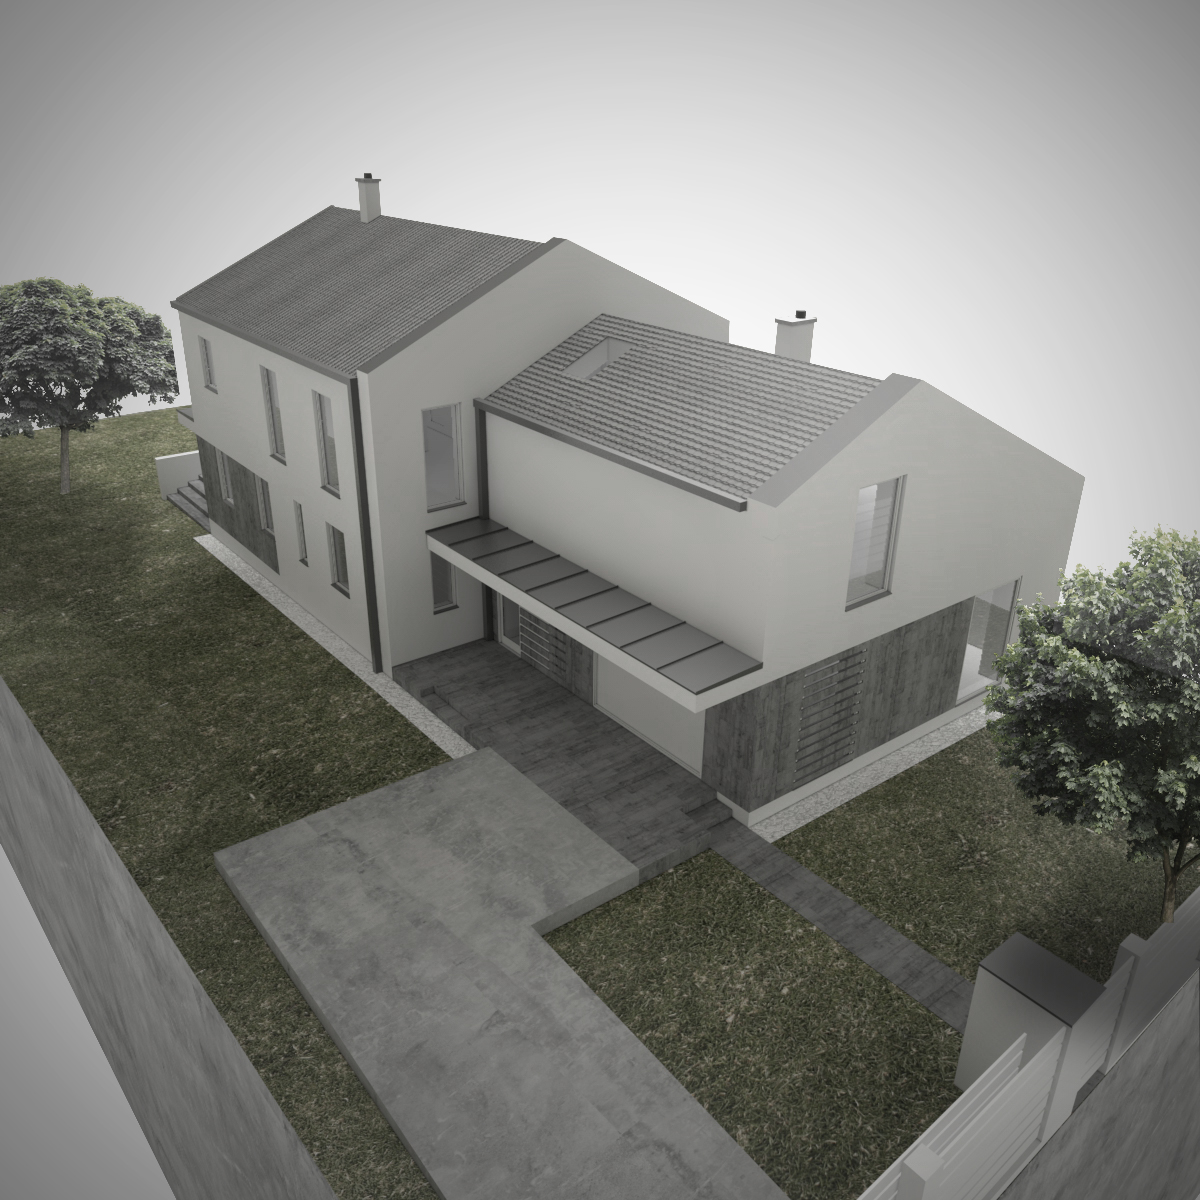 02_Ringlo house